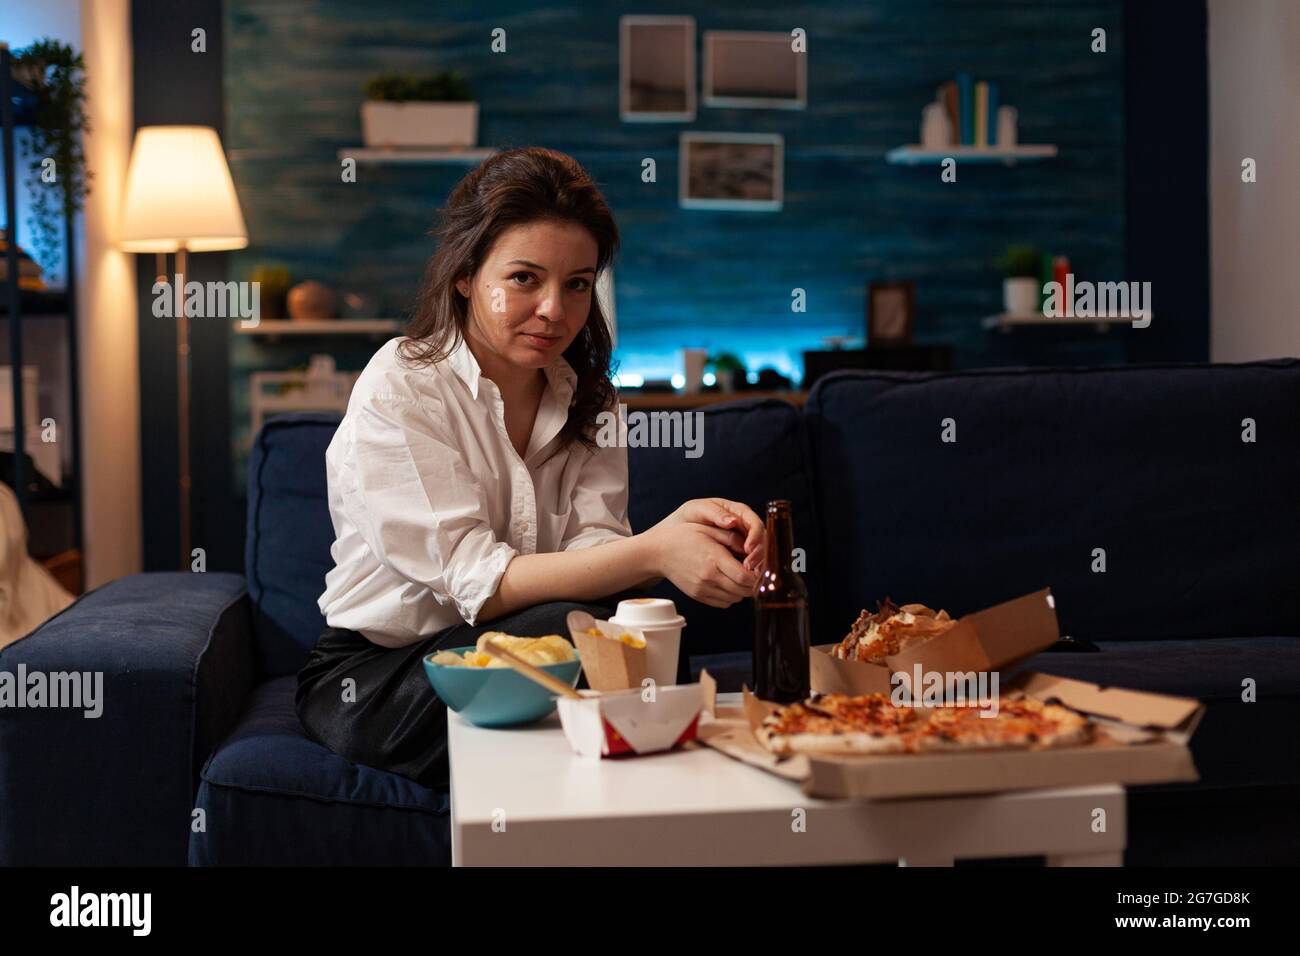 Portrait of smiling woman looking into camera sitting on couch enjoying free time ordering takeaway meal in living room at night. Junk food standing on table. Fast food order. Delivery fast-food box Stock Photo